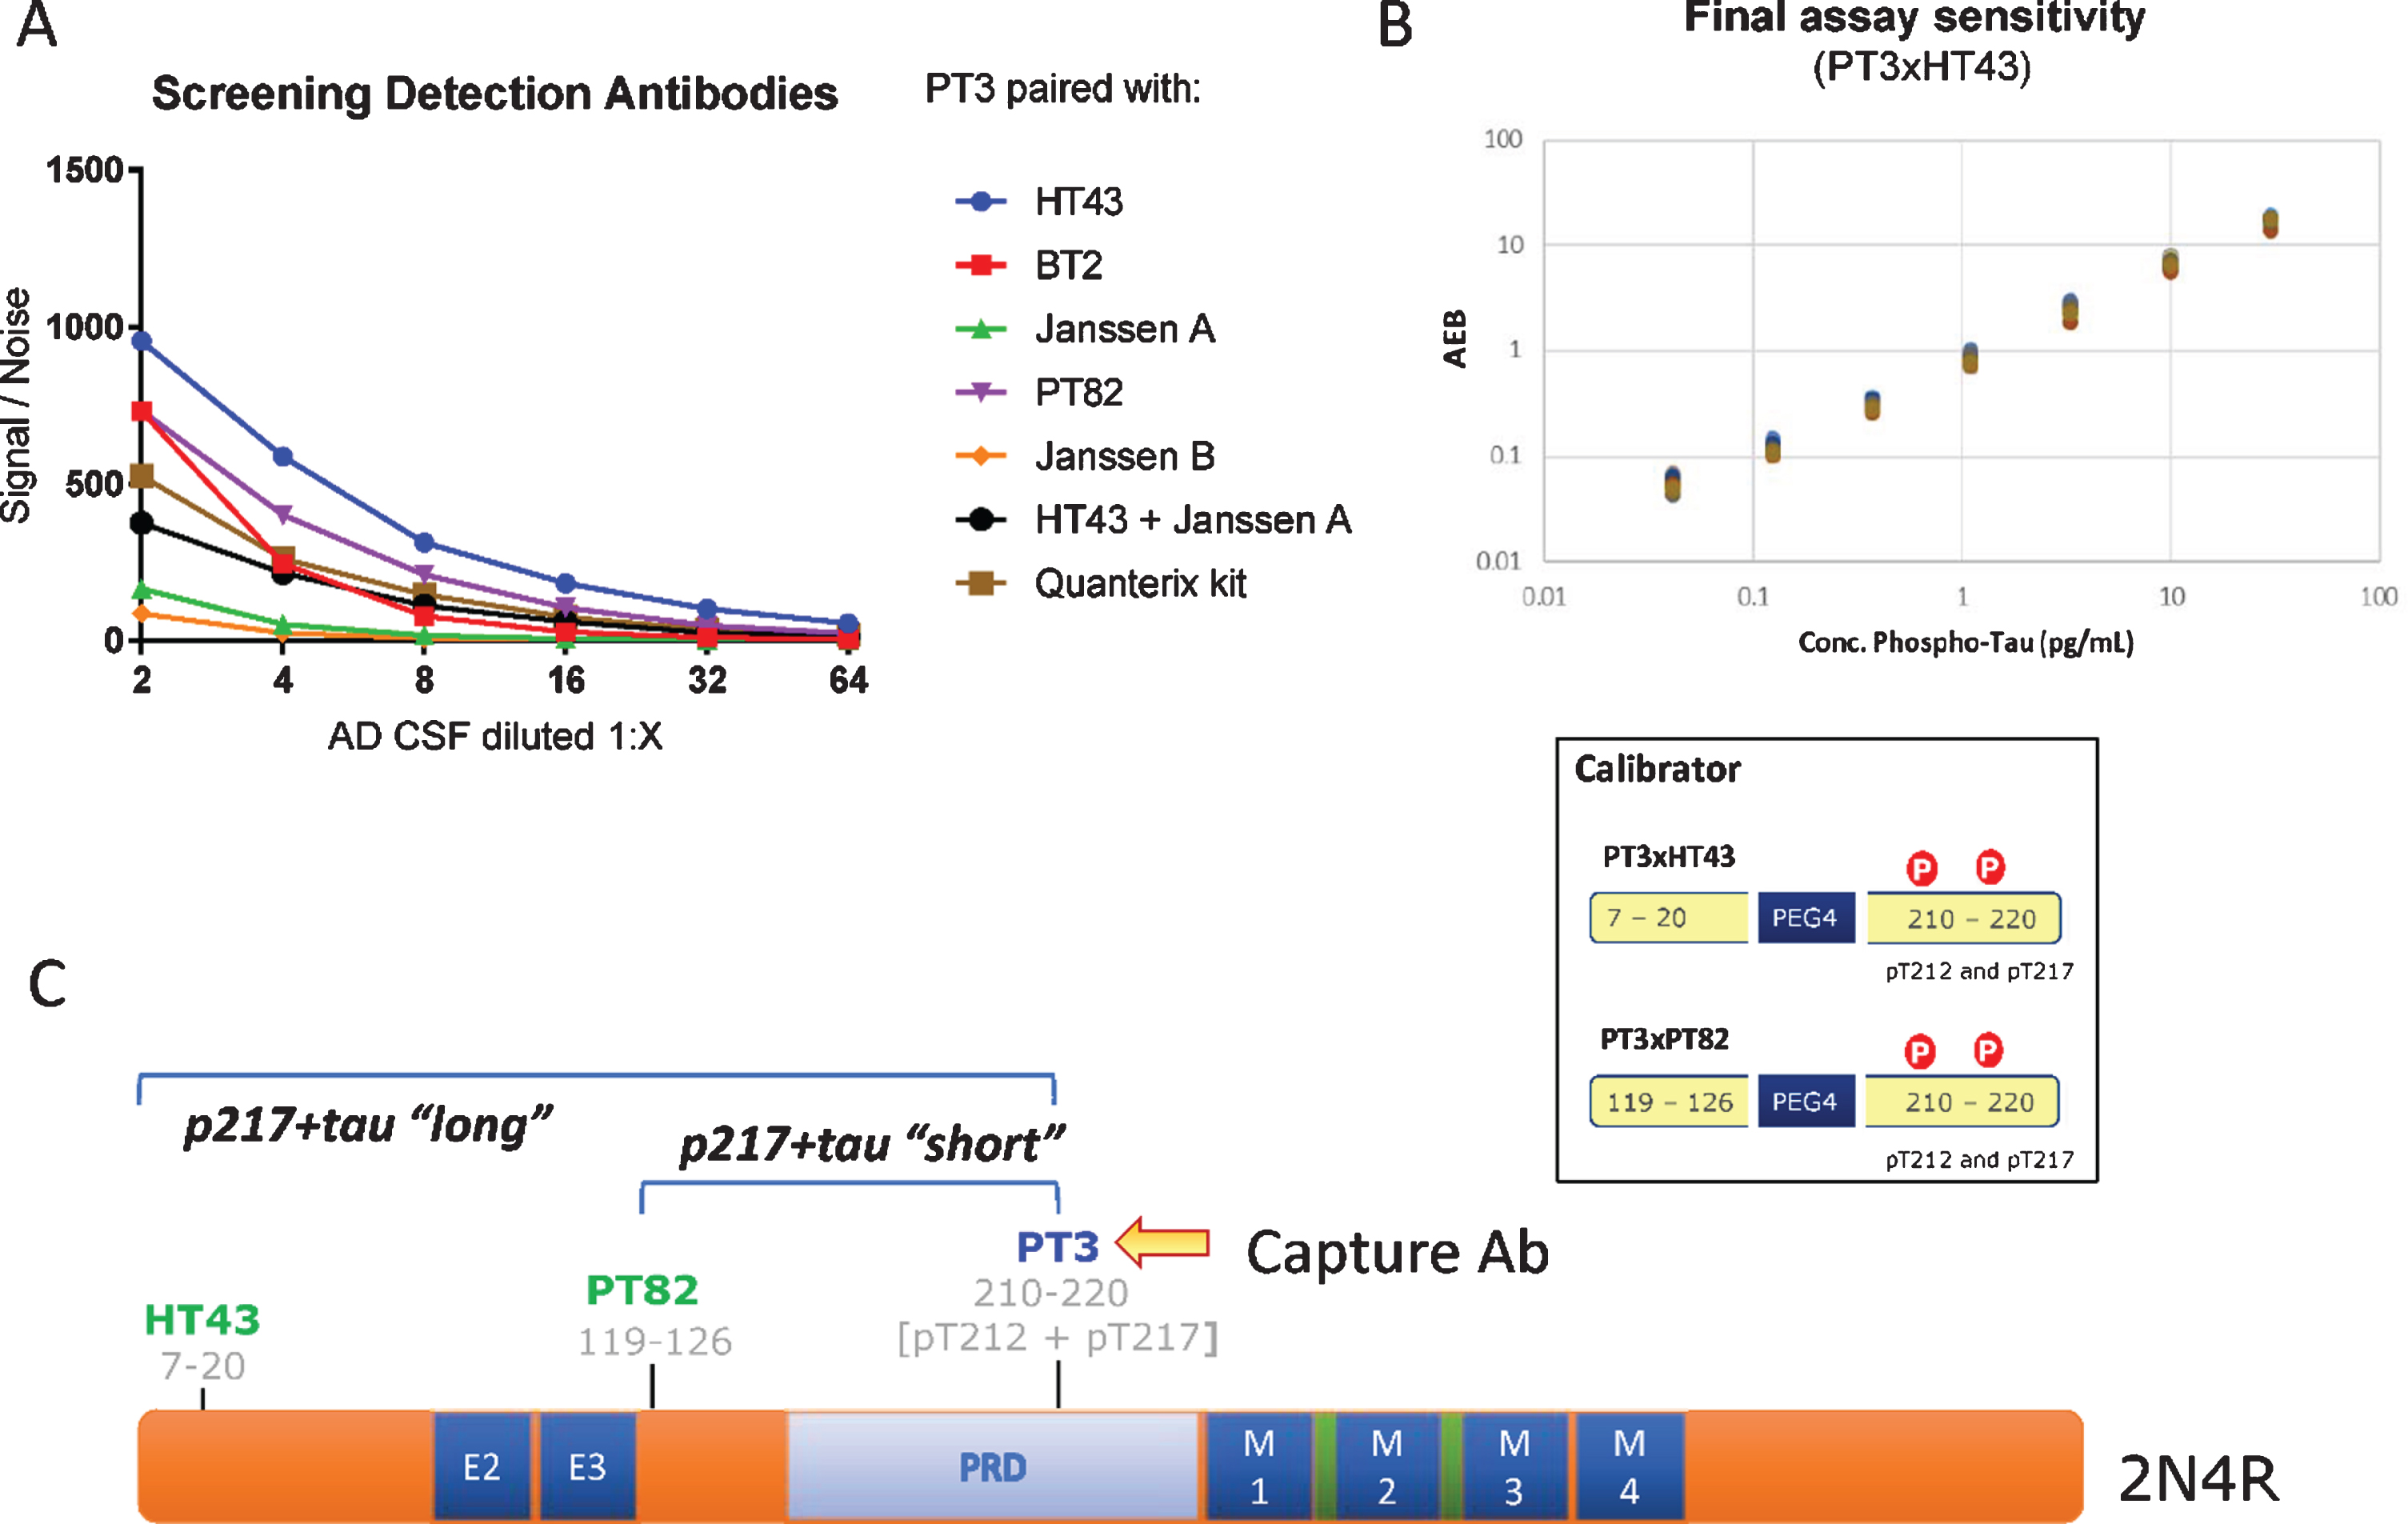 CSF p217 + tau assay design. A) Various detection antibodies were paired with PT3 (as capture agent) in Simoa HD-1 platform, using AD CSF as analyte. B) PT3 gave the strongest signal/noise when paired with HT43 or PT82. These assays were optimized and specific calibrant peptides were synthesized (bottom). Standard curves for these assays were then run from 30 to 0.04 pg/ml, revealing LLOD of 2 fg/ml and LLOQ of 40 fg/ml in the PT3×HT43 assay. C) Schematic of the epitopes probed in the p217 + tau assays.